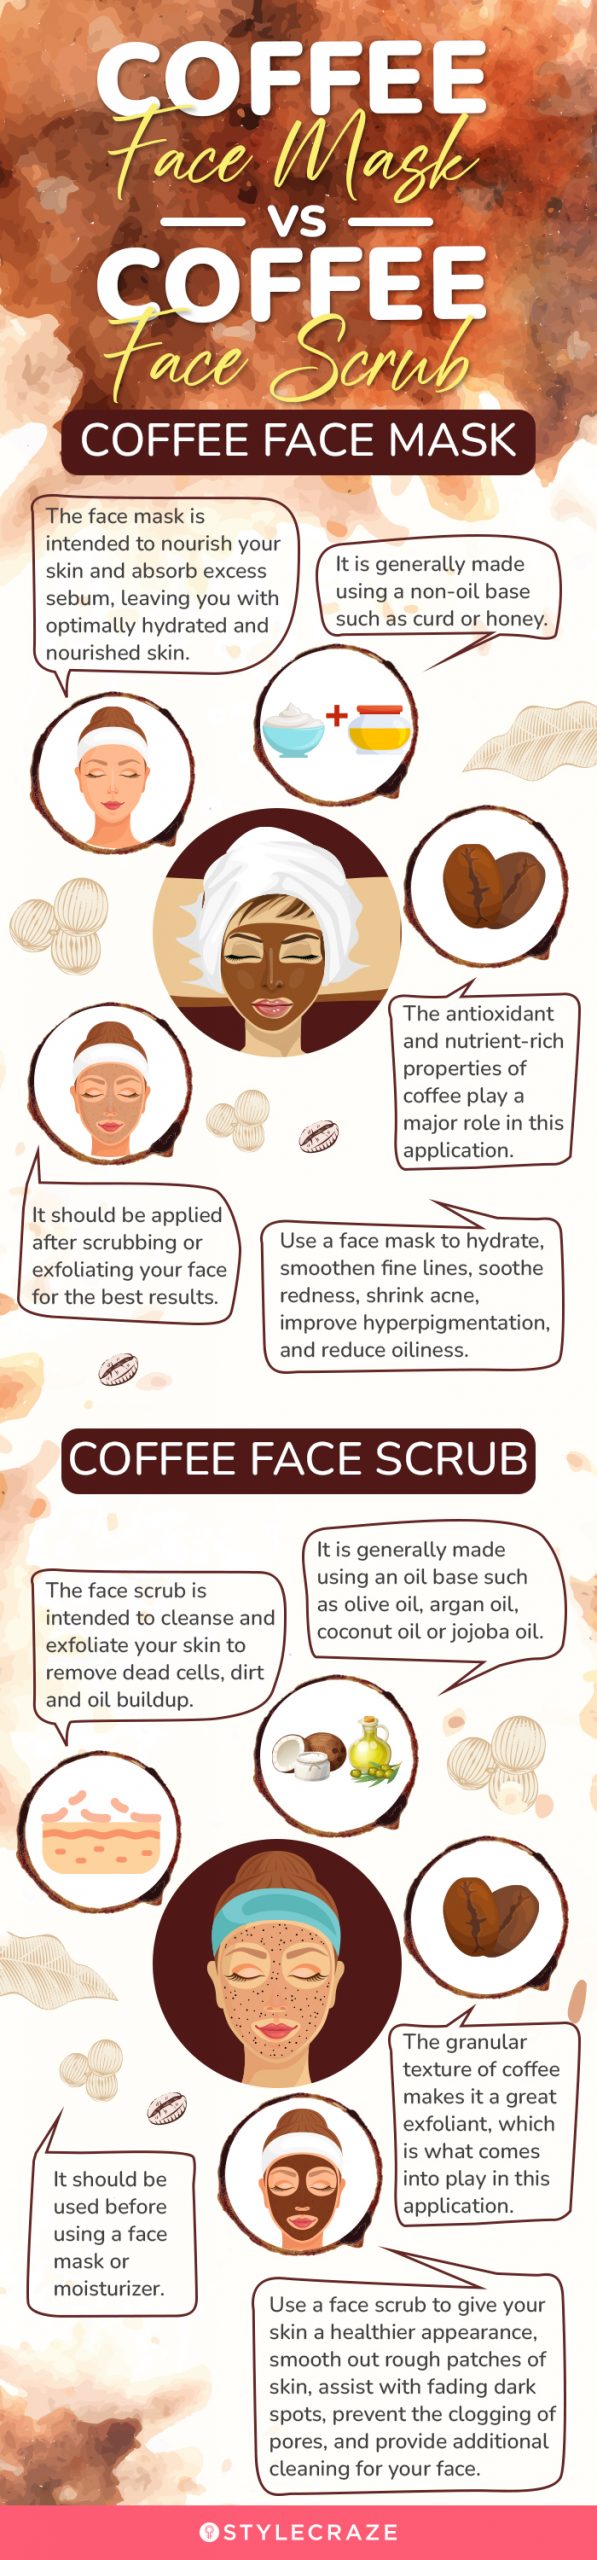 coffee face mask vs coffee face scrub [infographic]